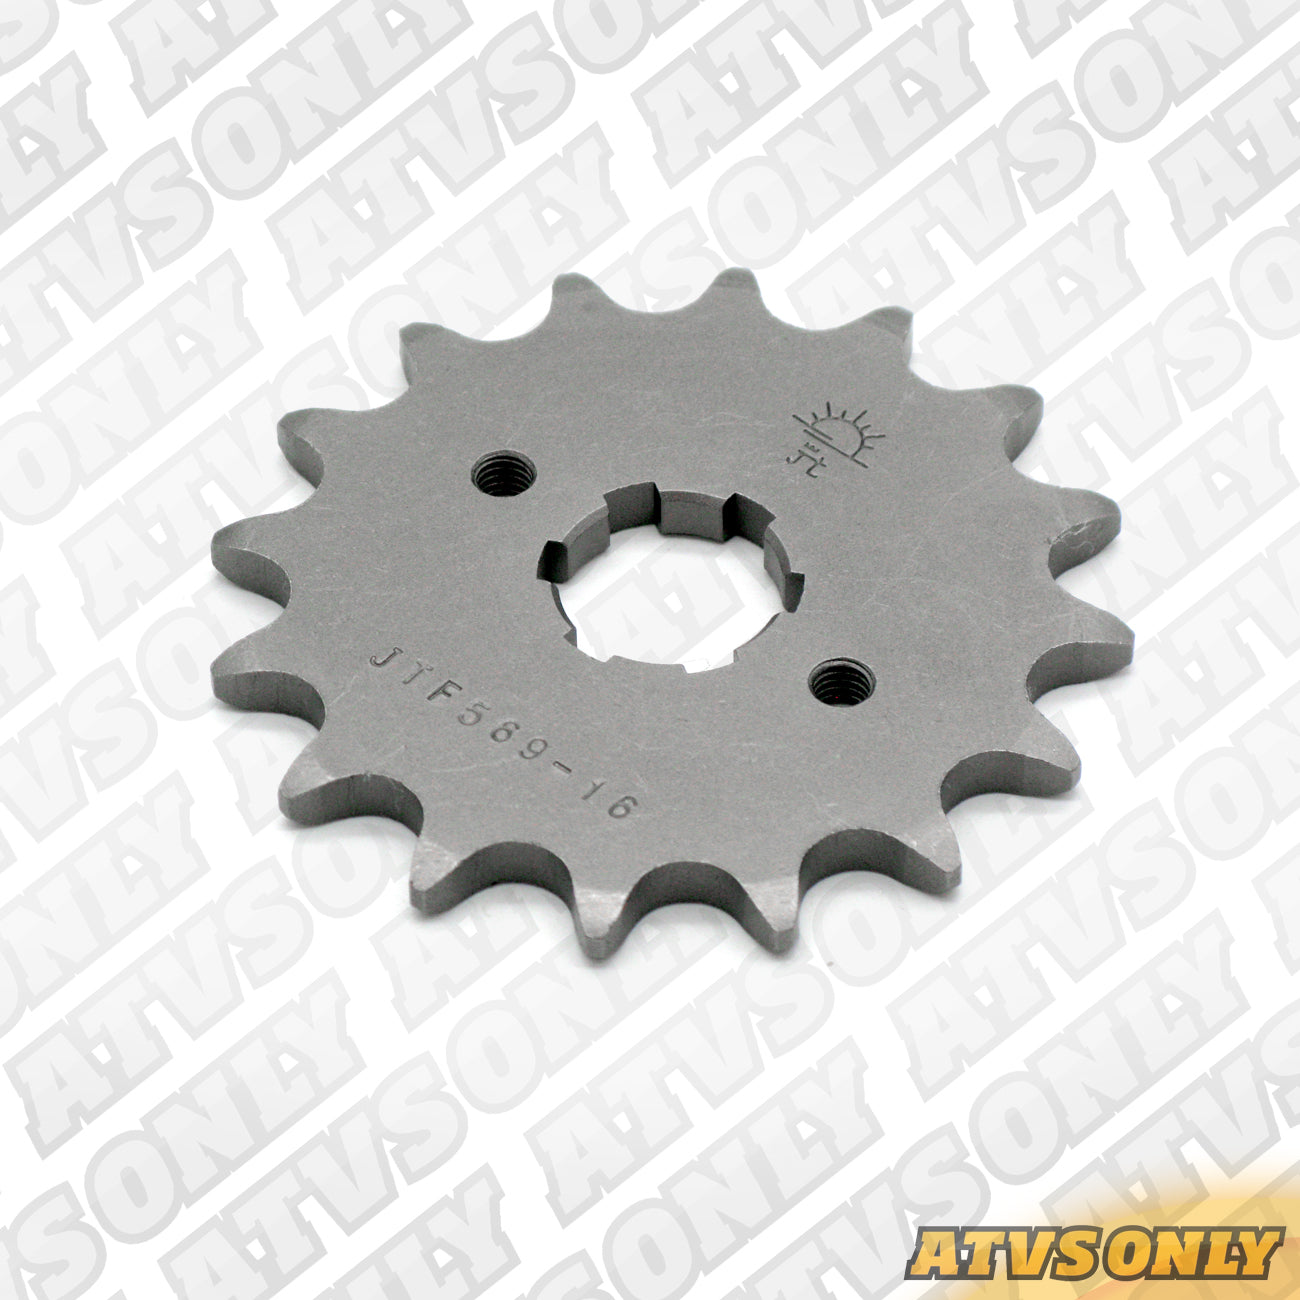 Front Sprockets for Yamaha Warrior 350 ’87-’04